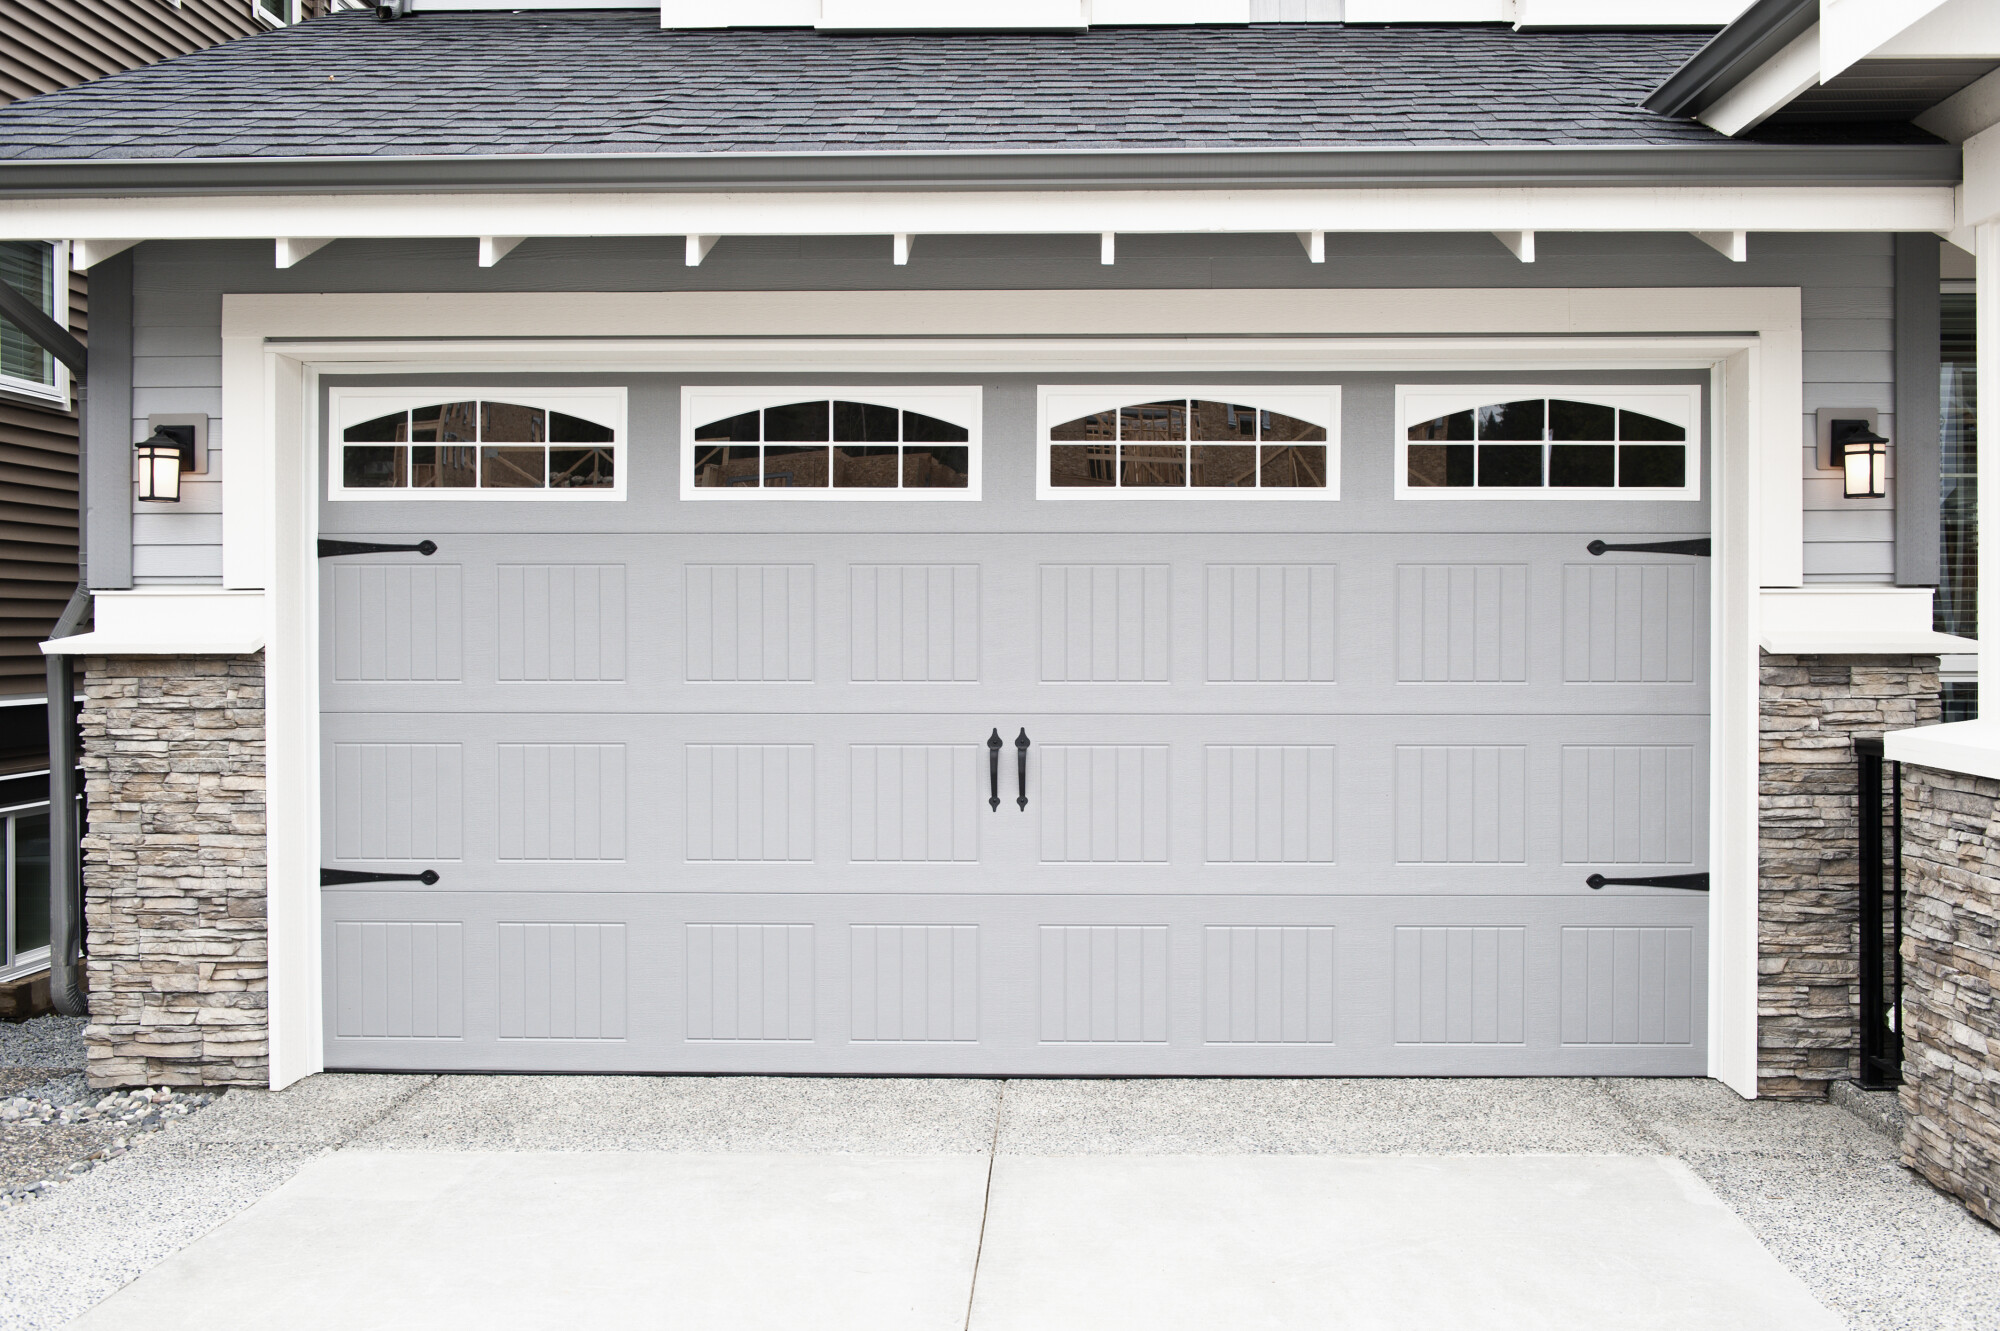 What You Should Know About the Garage Door Installation Price